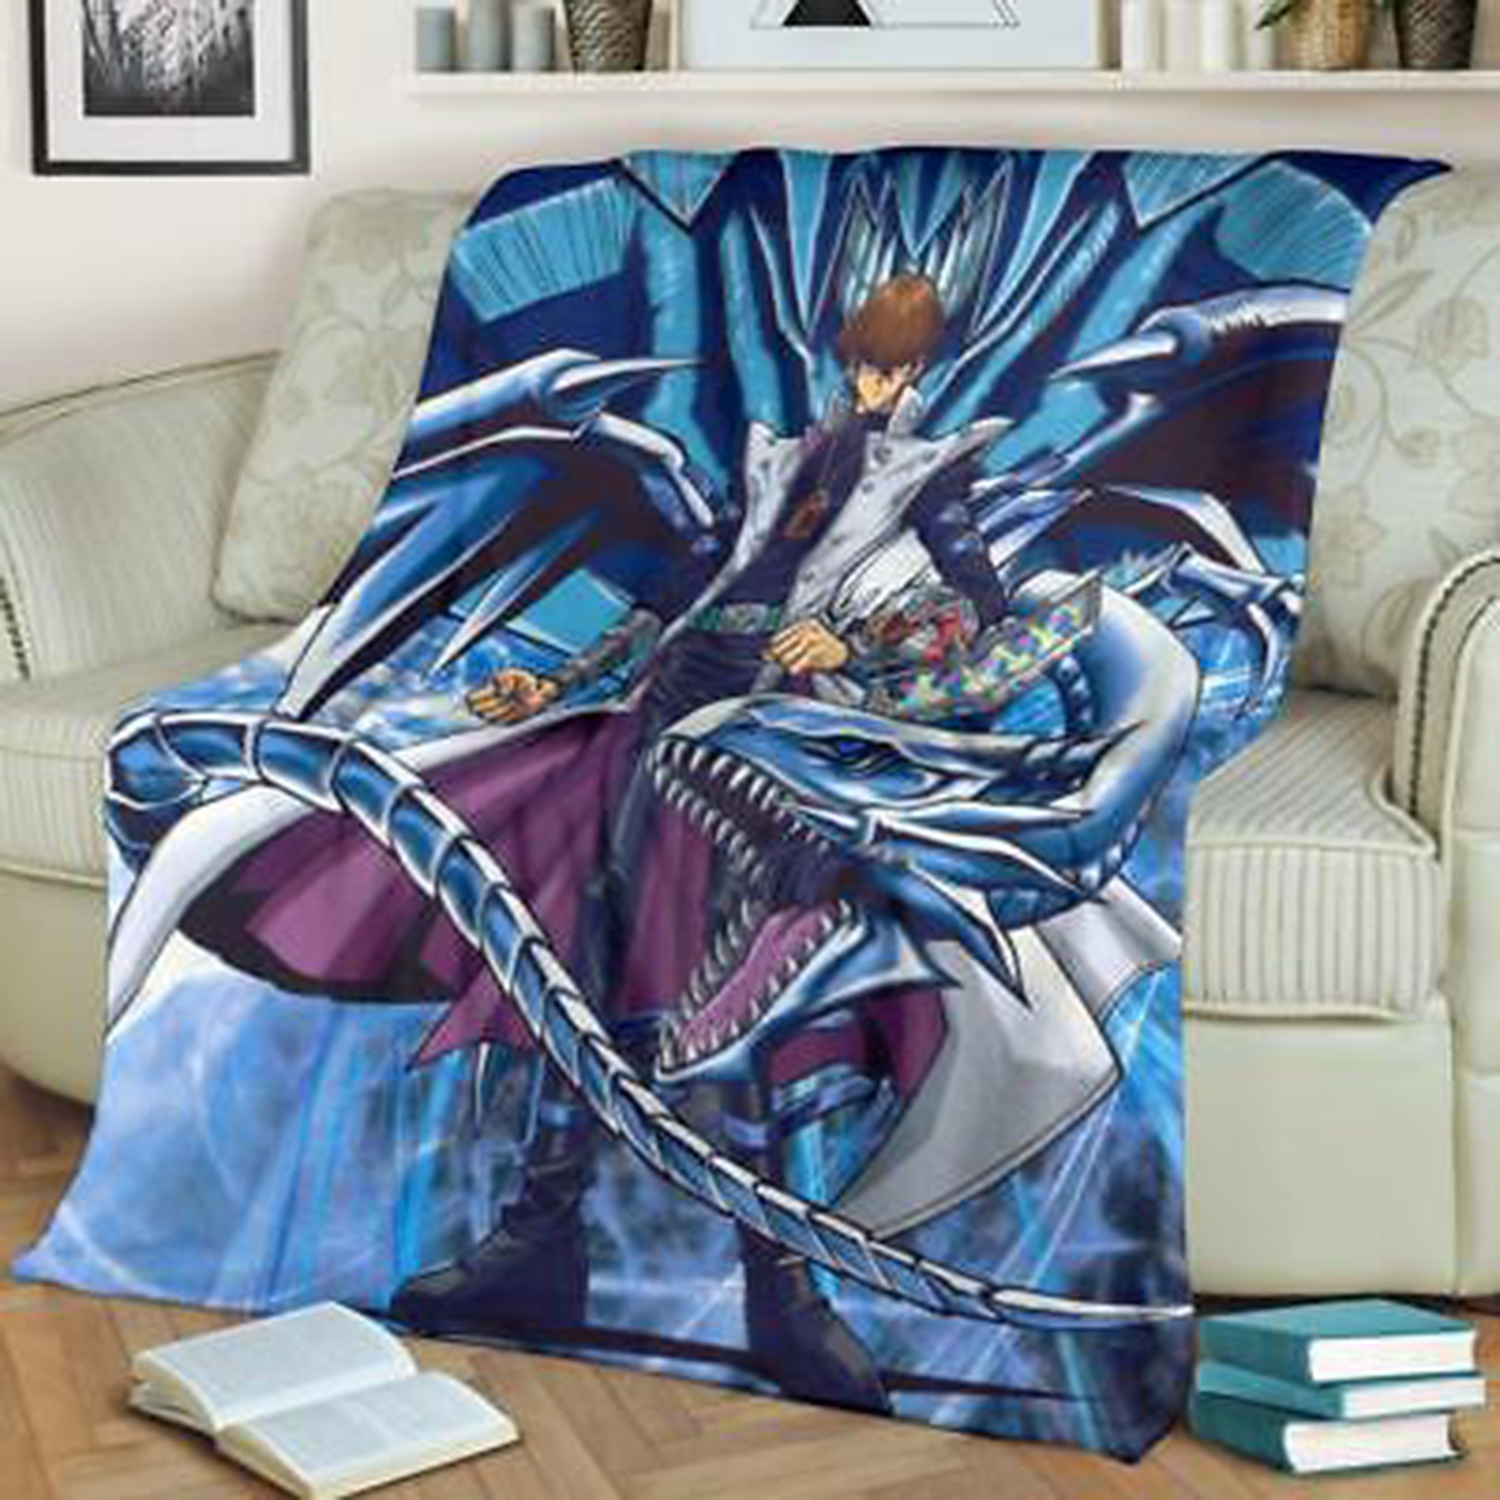 Unleashing the Power of Chaos: Exploring the Chaos Blue-Eyes White Dragon and the Blue-Eyes White Dragon Blanket